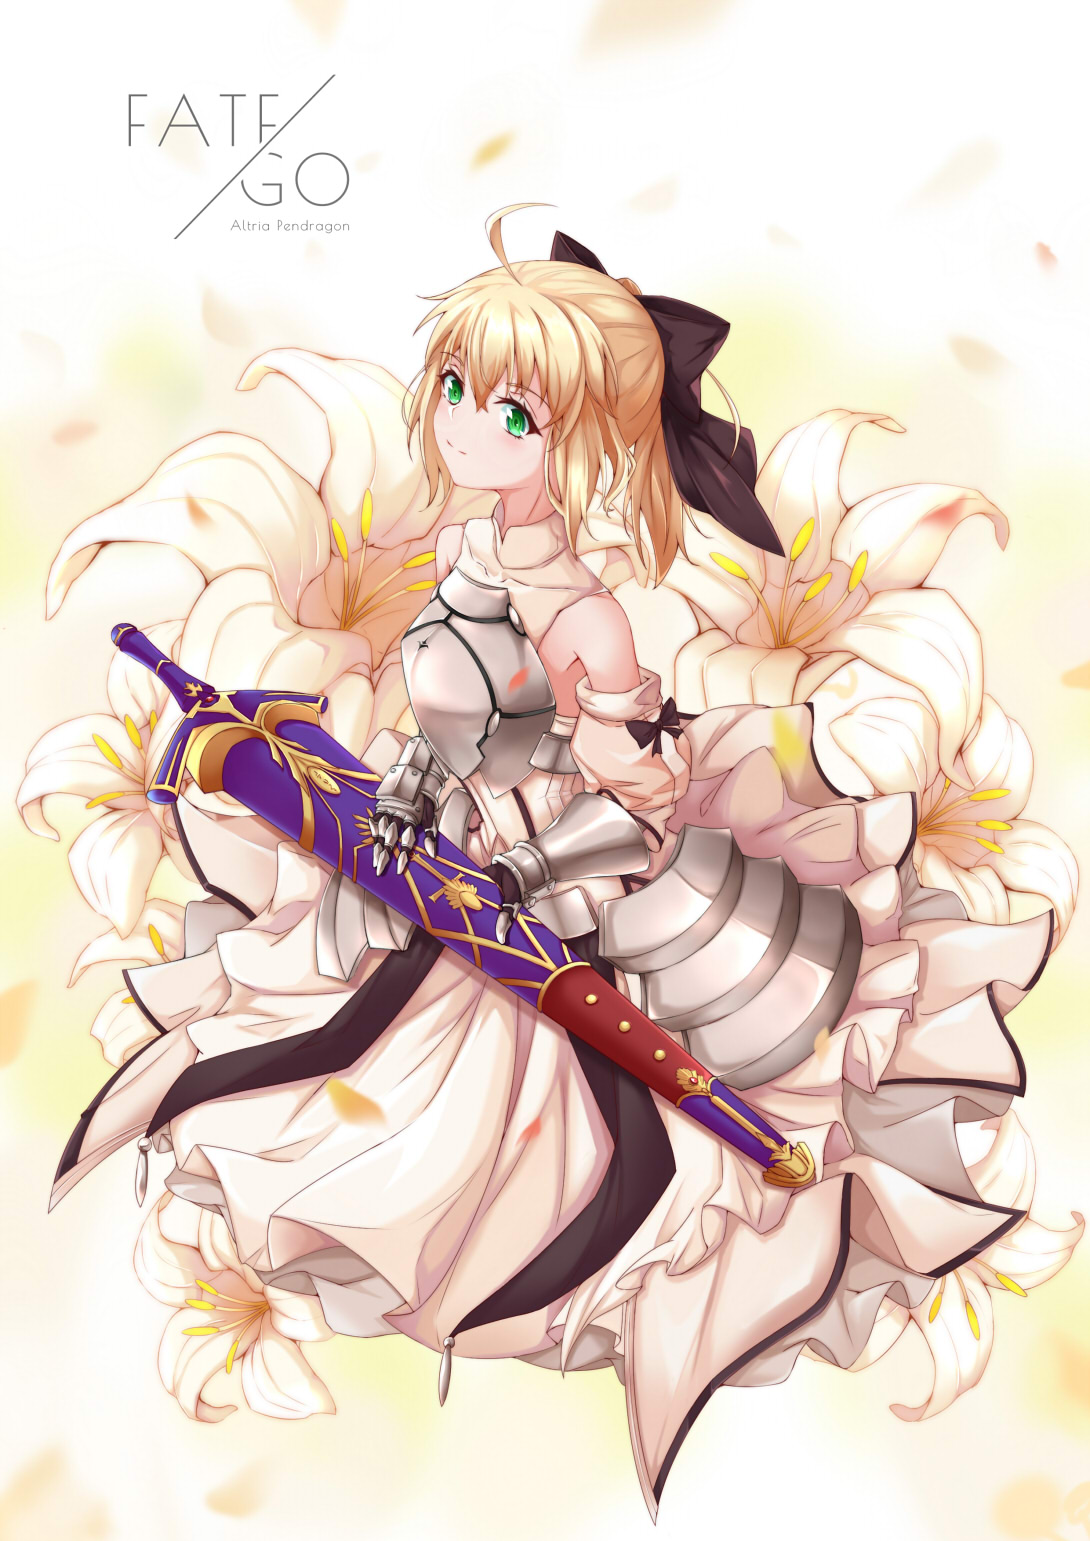 Anime 1090x1541 anime anime girls Fate series Fate/Unlimited Codes  Fate/Grand Order blonde Saber Lily Artoria Pendragon